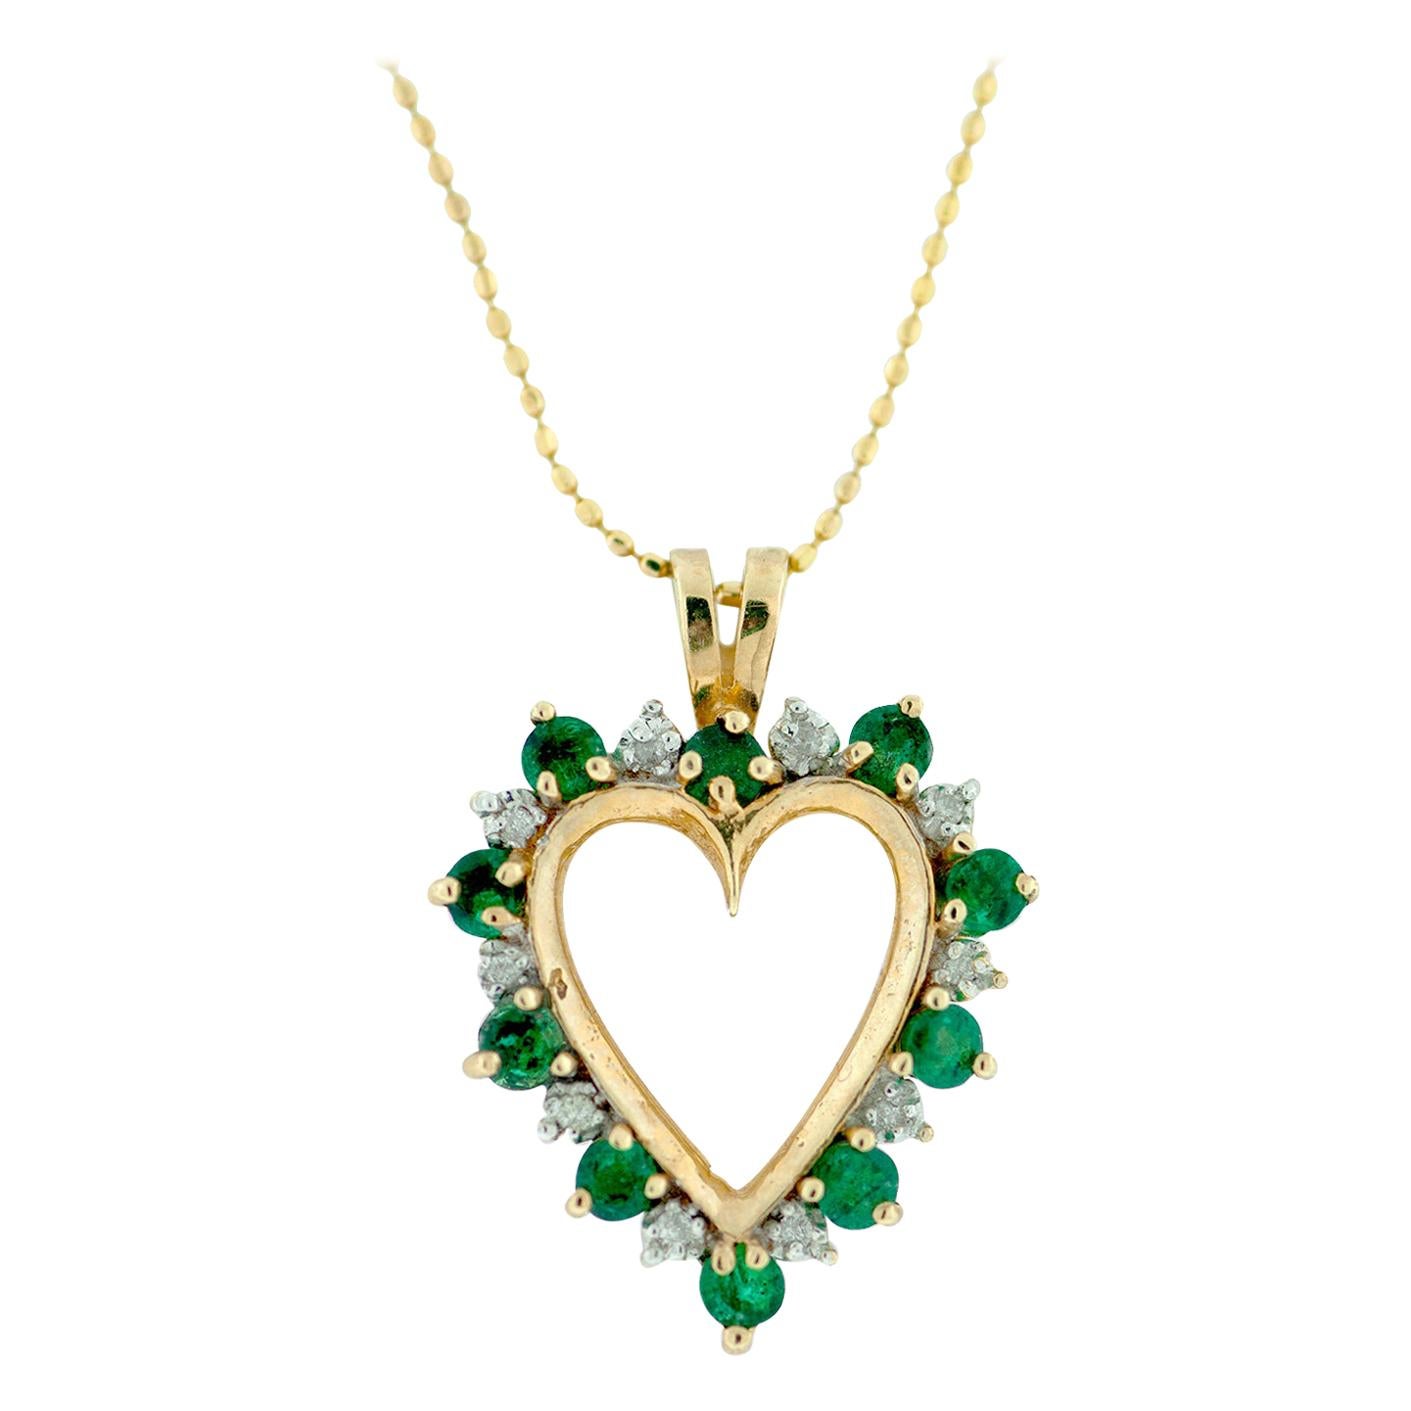 Open Heart Pendant with Emerald and Diamonds on Gold Chain